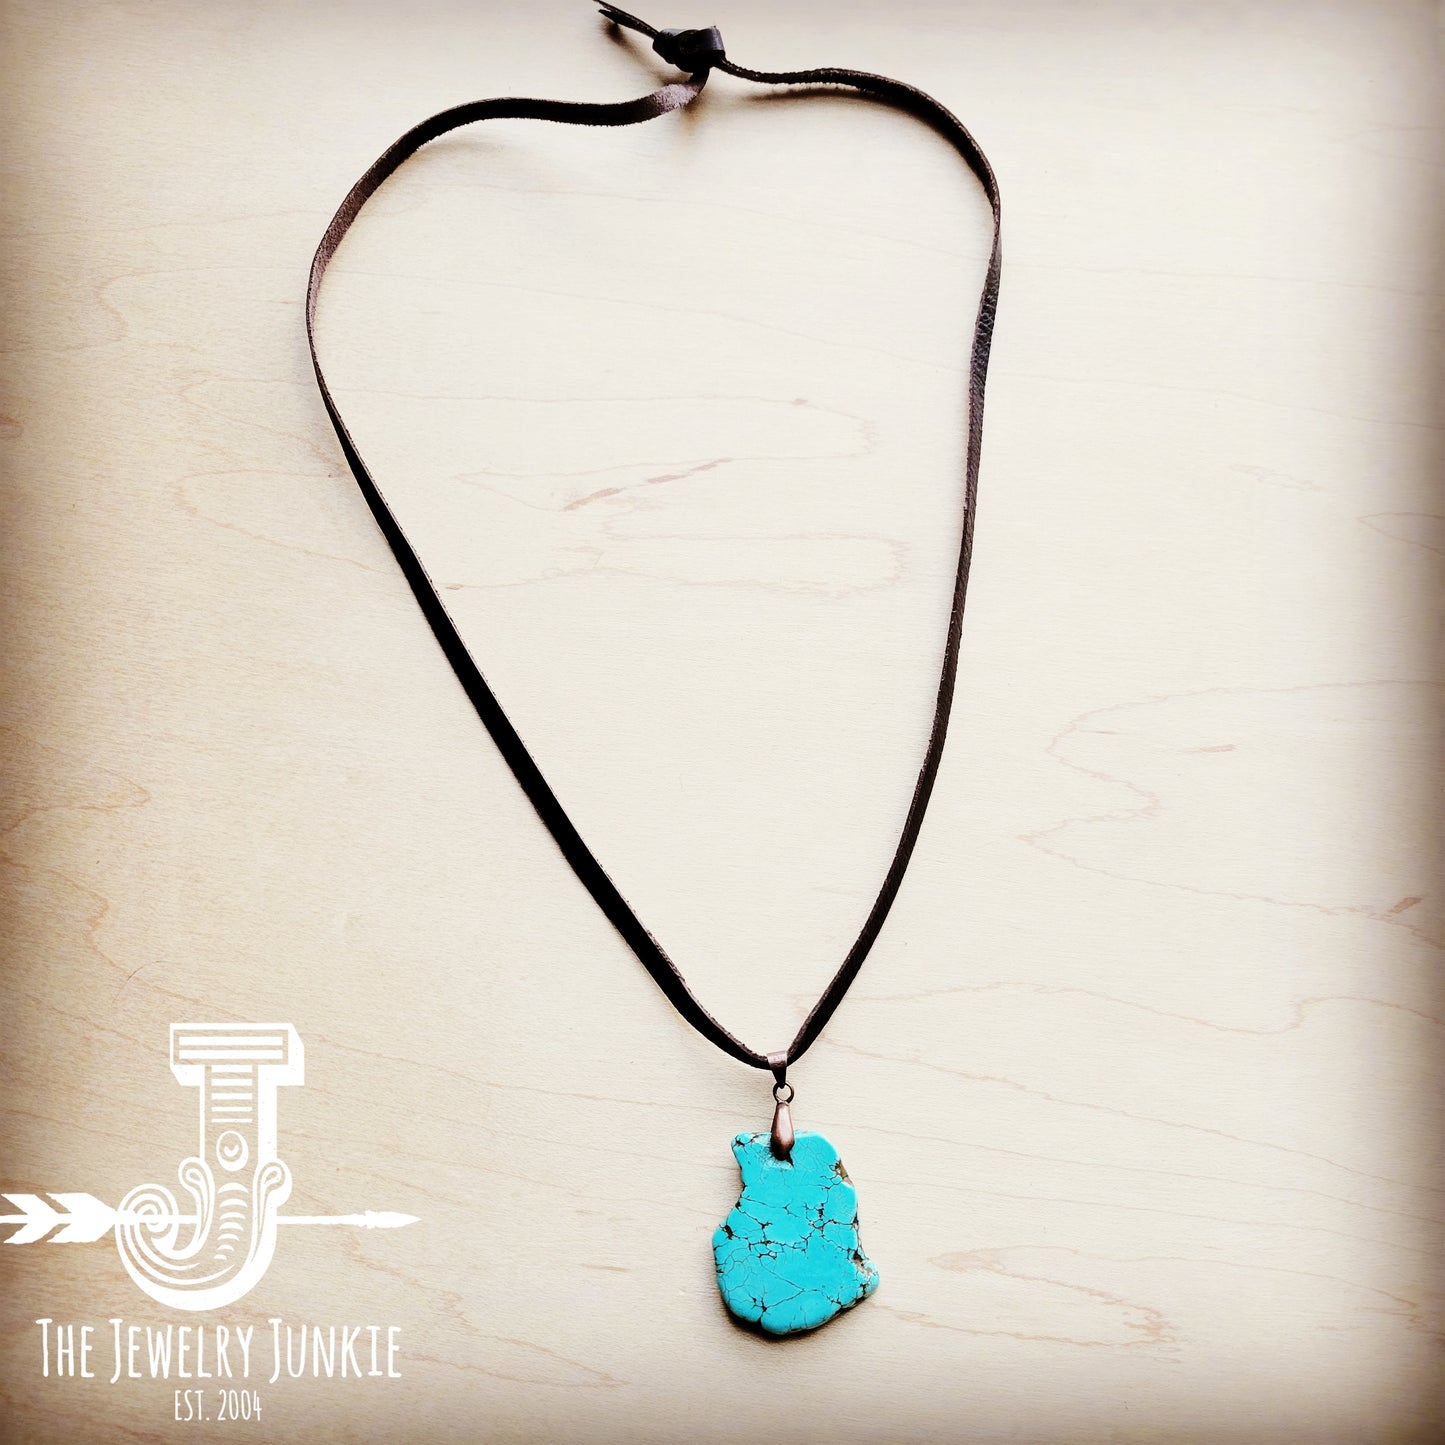 Turquoise Slab Pendant on Leather Cord Necklace 254d